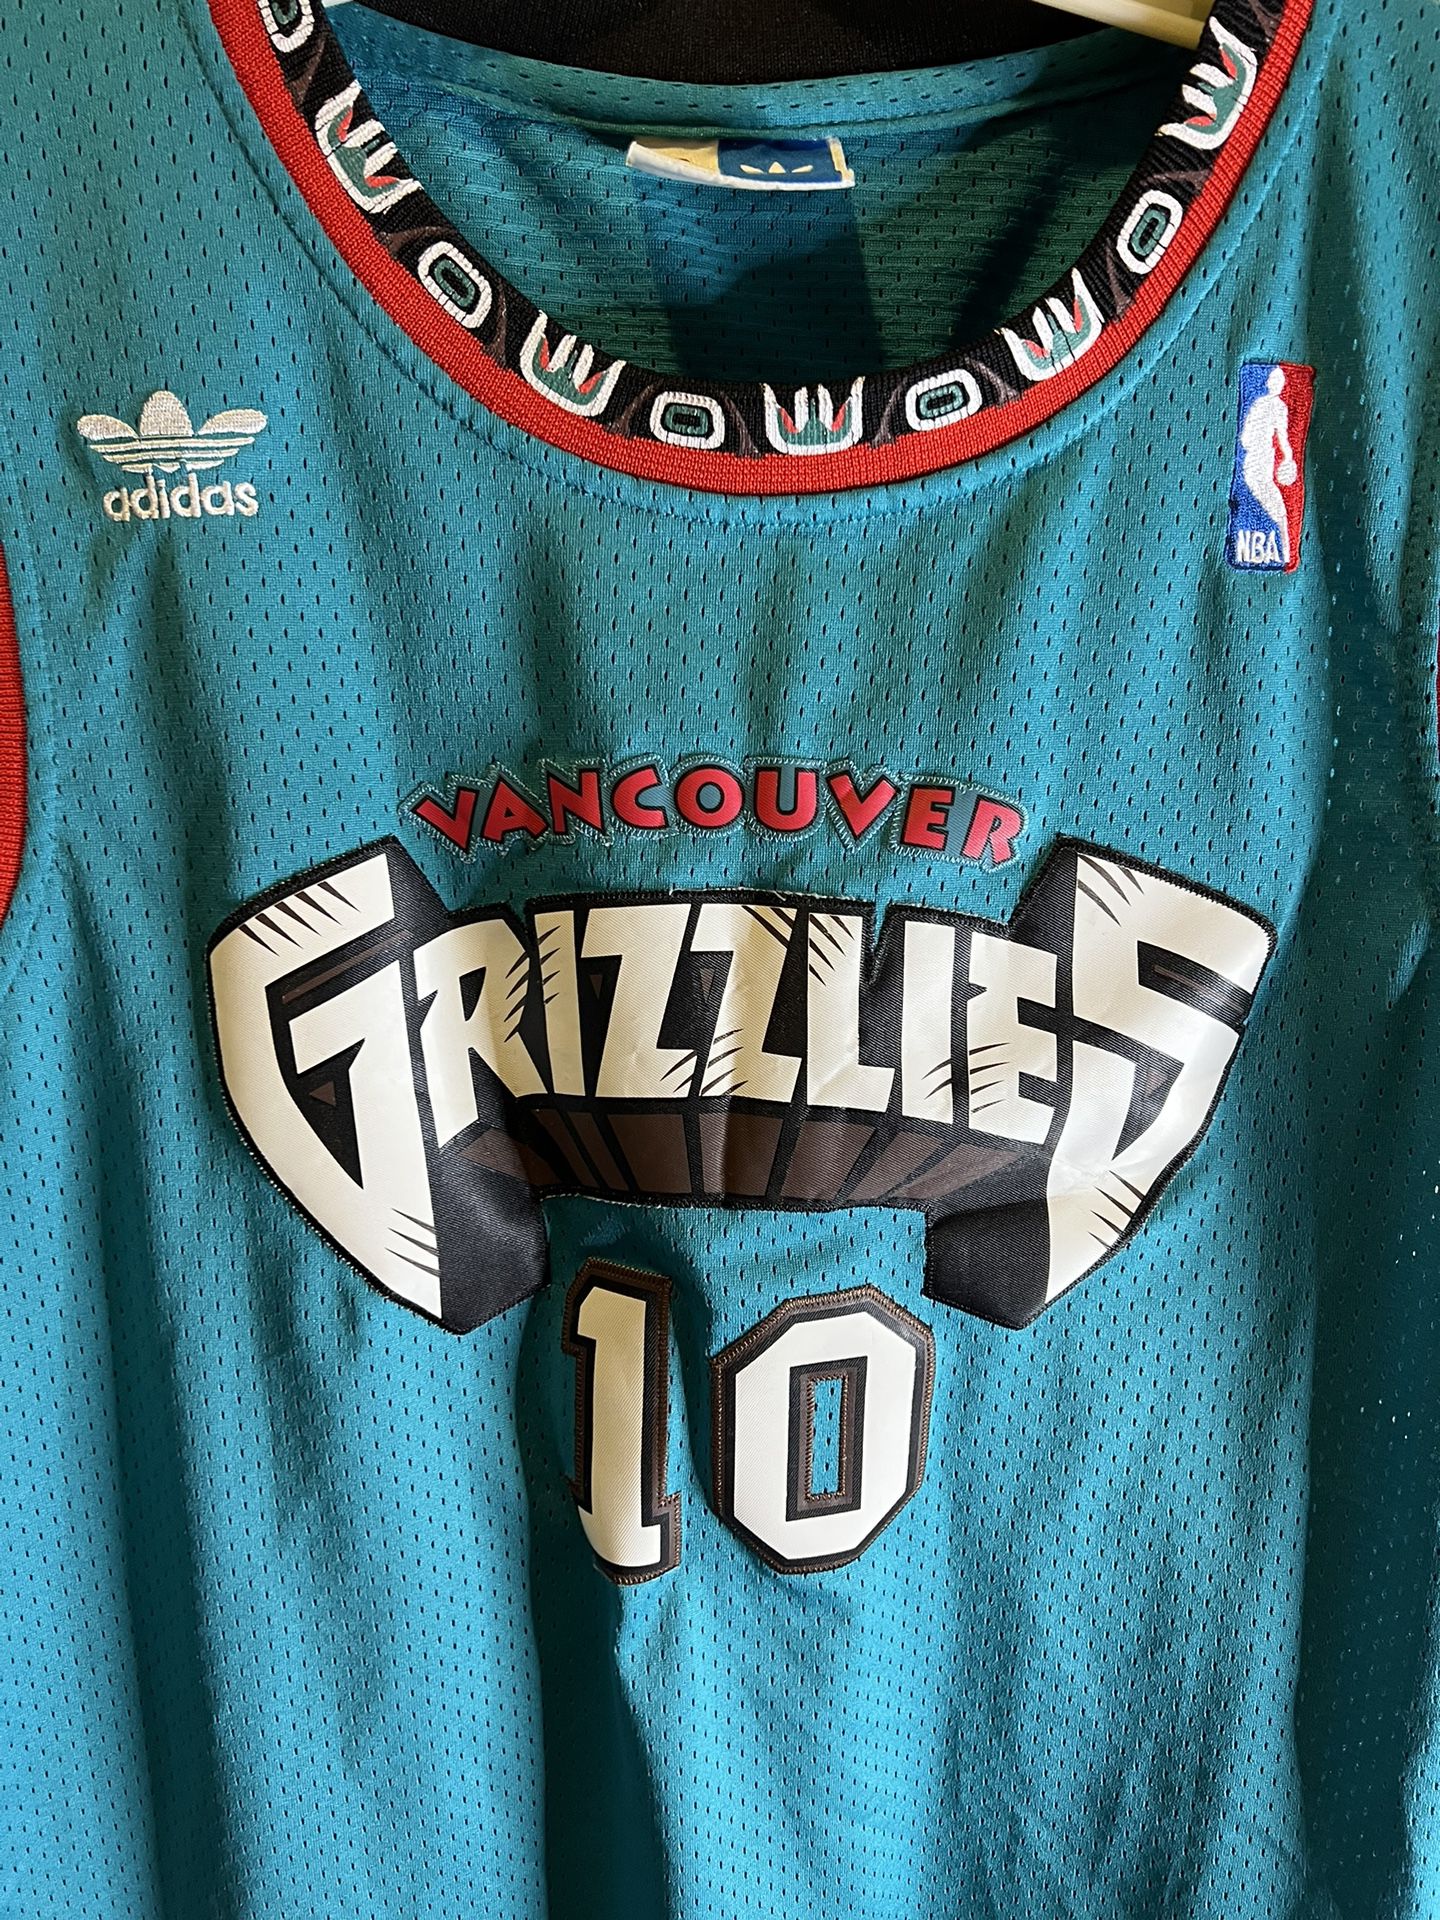 Vancouver Grizzlies Adidas Hardwood Classics Mike Bibby #10 Jersey Size XL  for Sale in Portland, OR - OfferUp